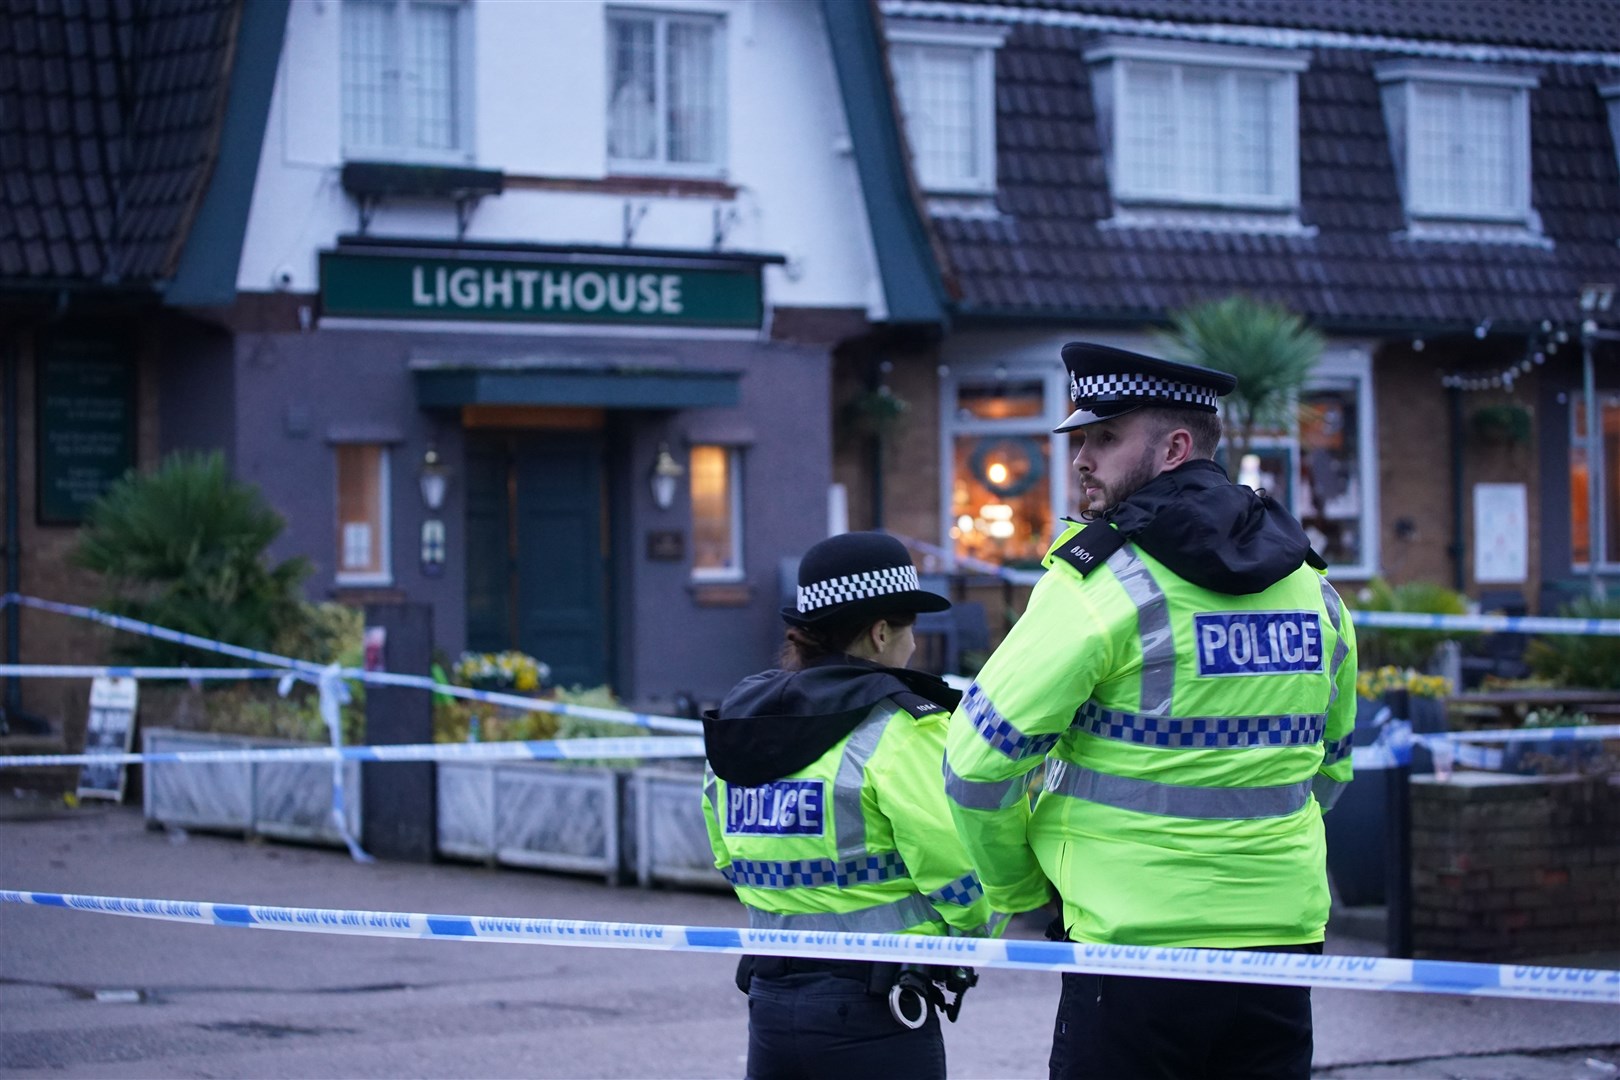 Police officers on duty at the Lighthouse in Wallasey Village (Peter Byrne/PA)